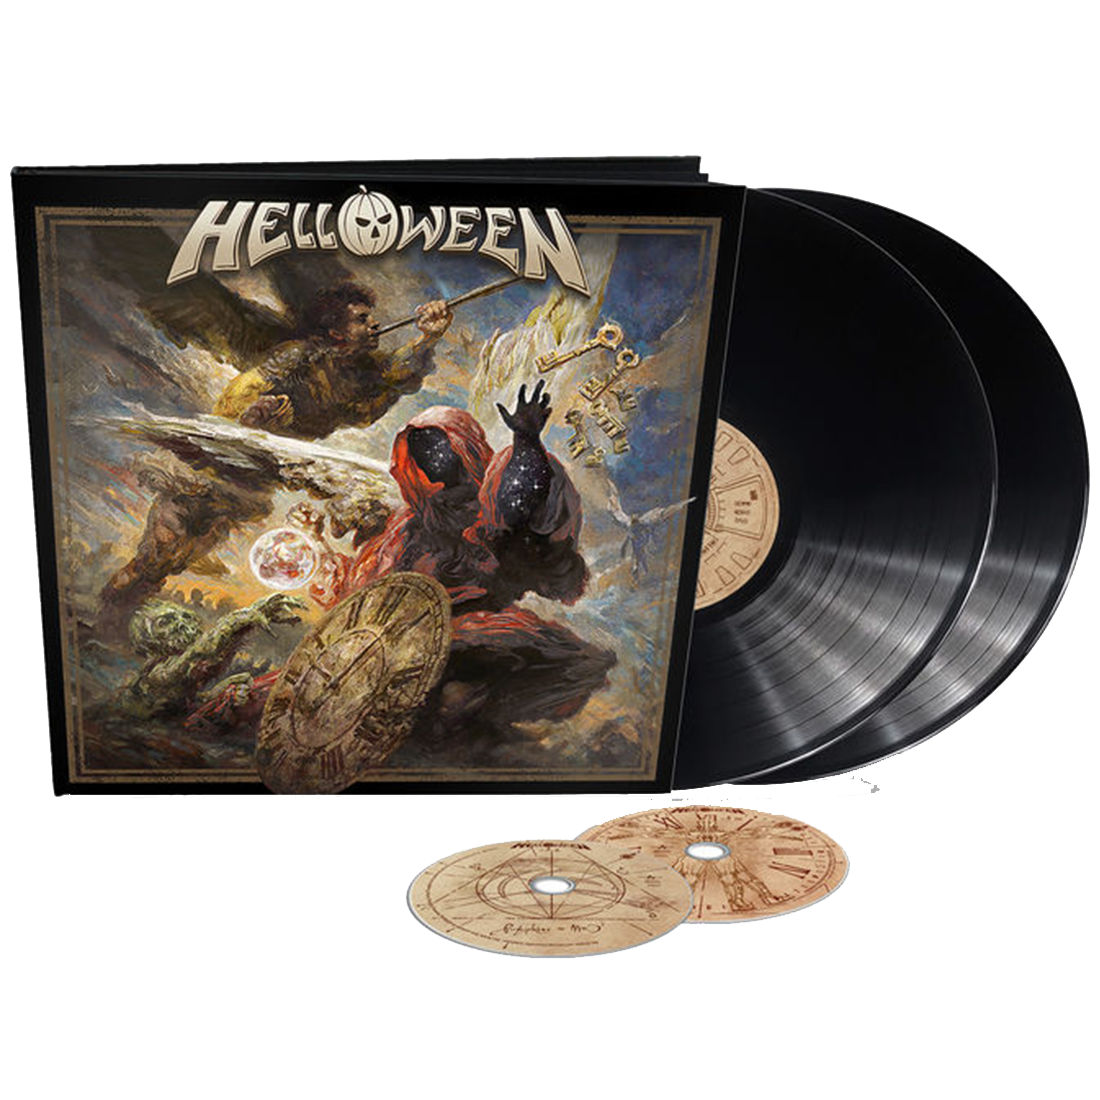 Helloween: Limited Edition 2LP + 2CD Earbook